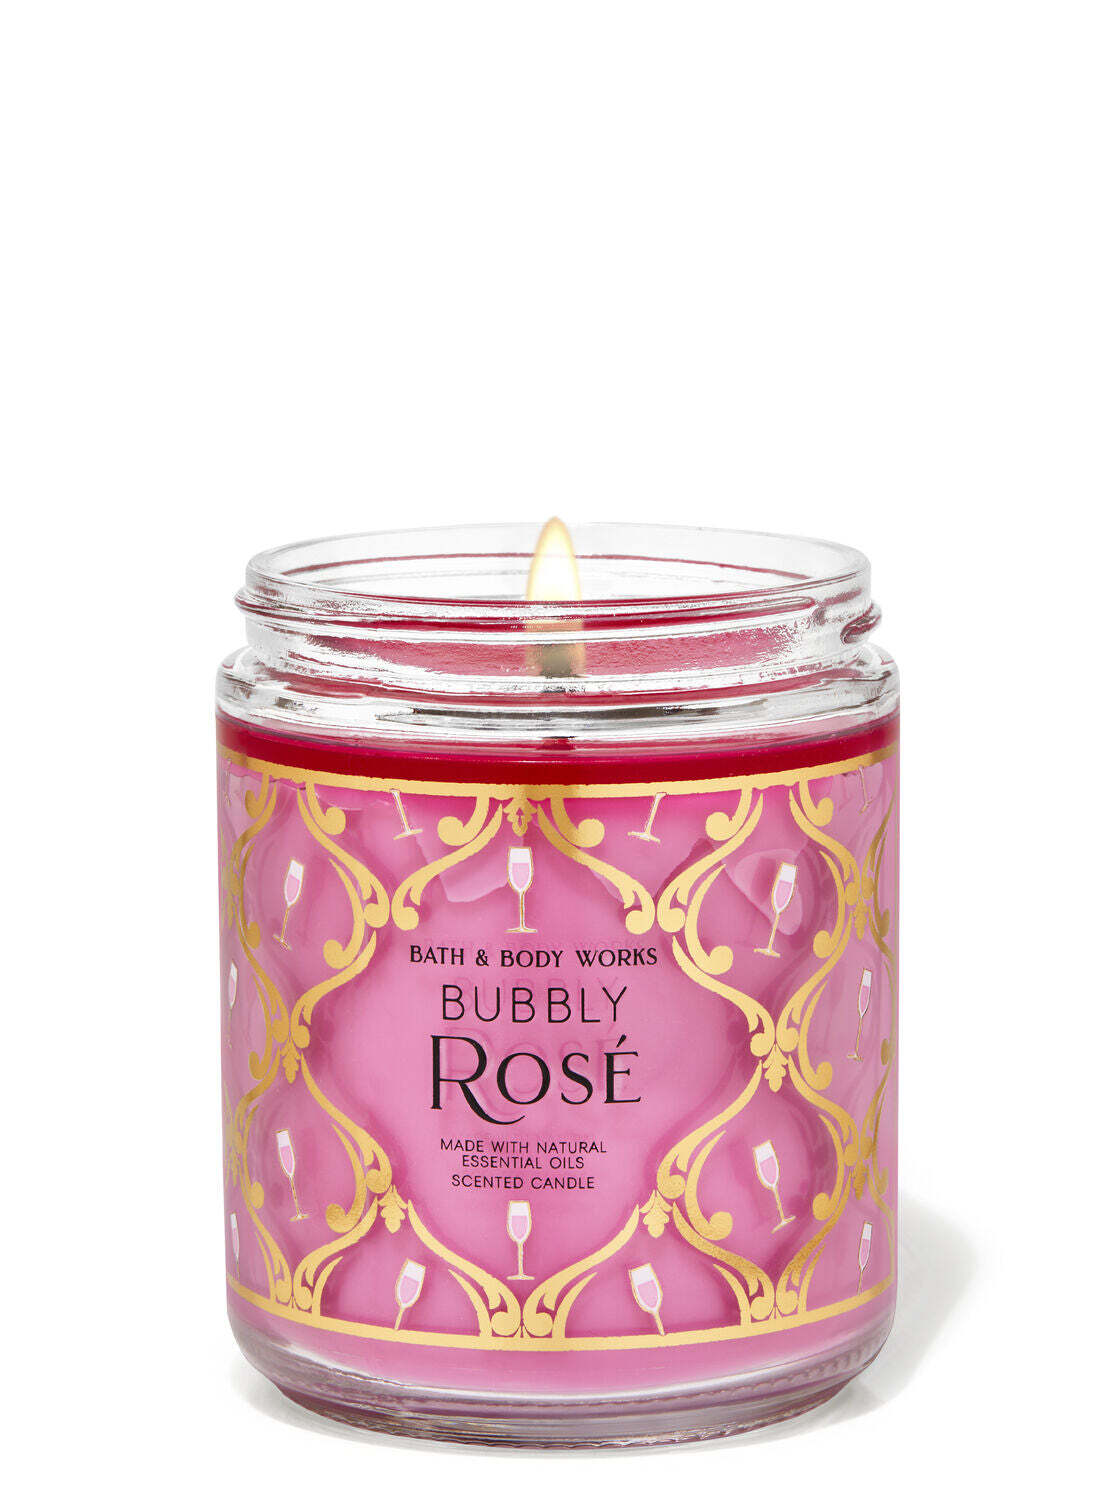 Bubbly rose - candle